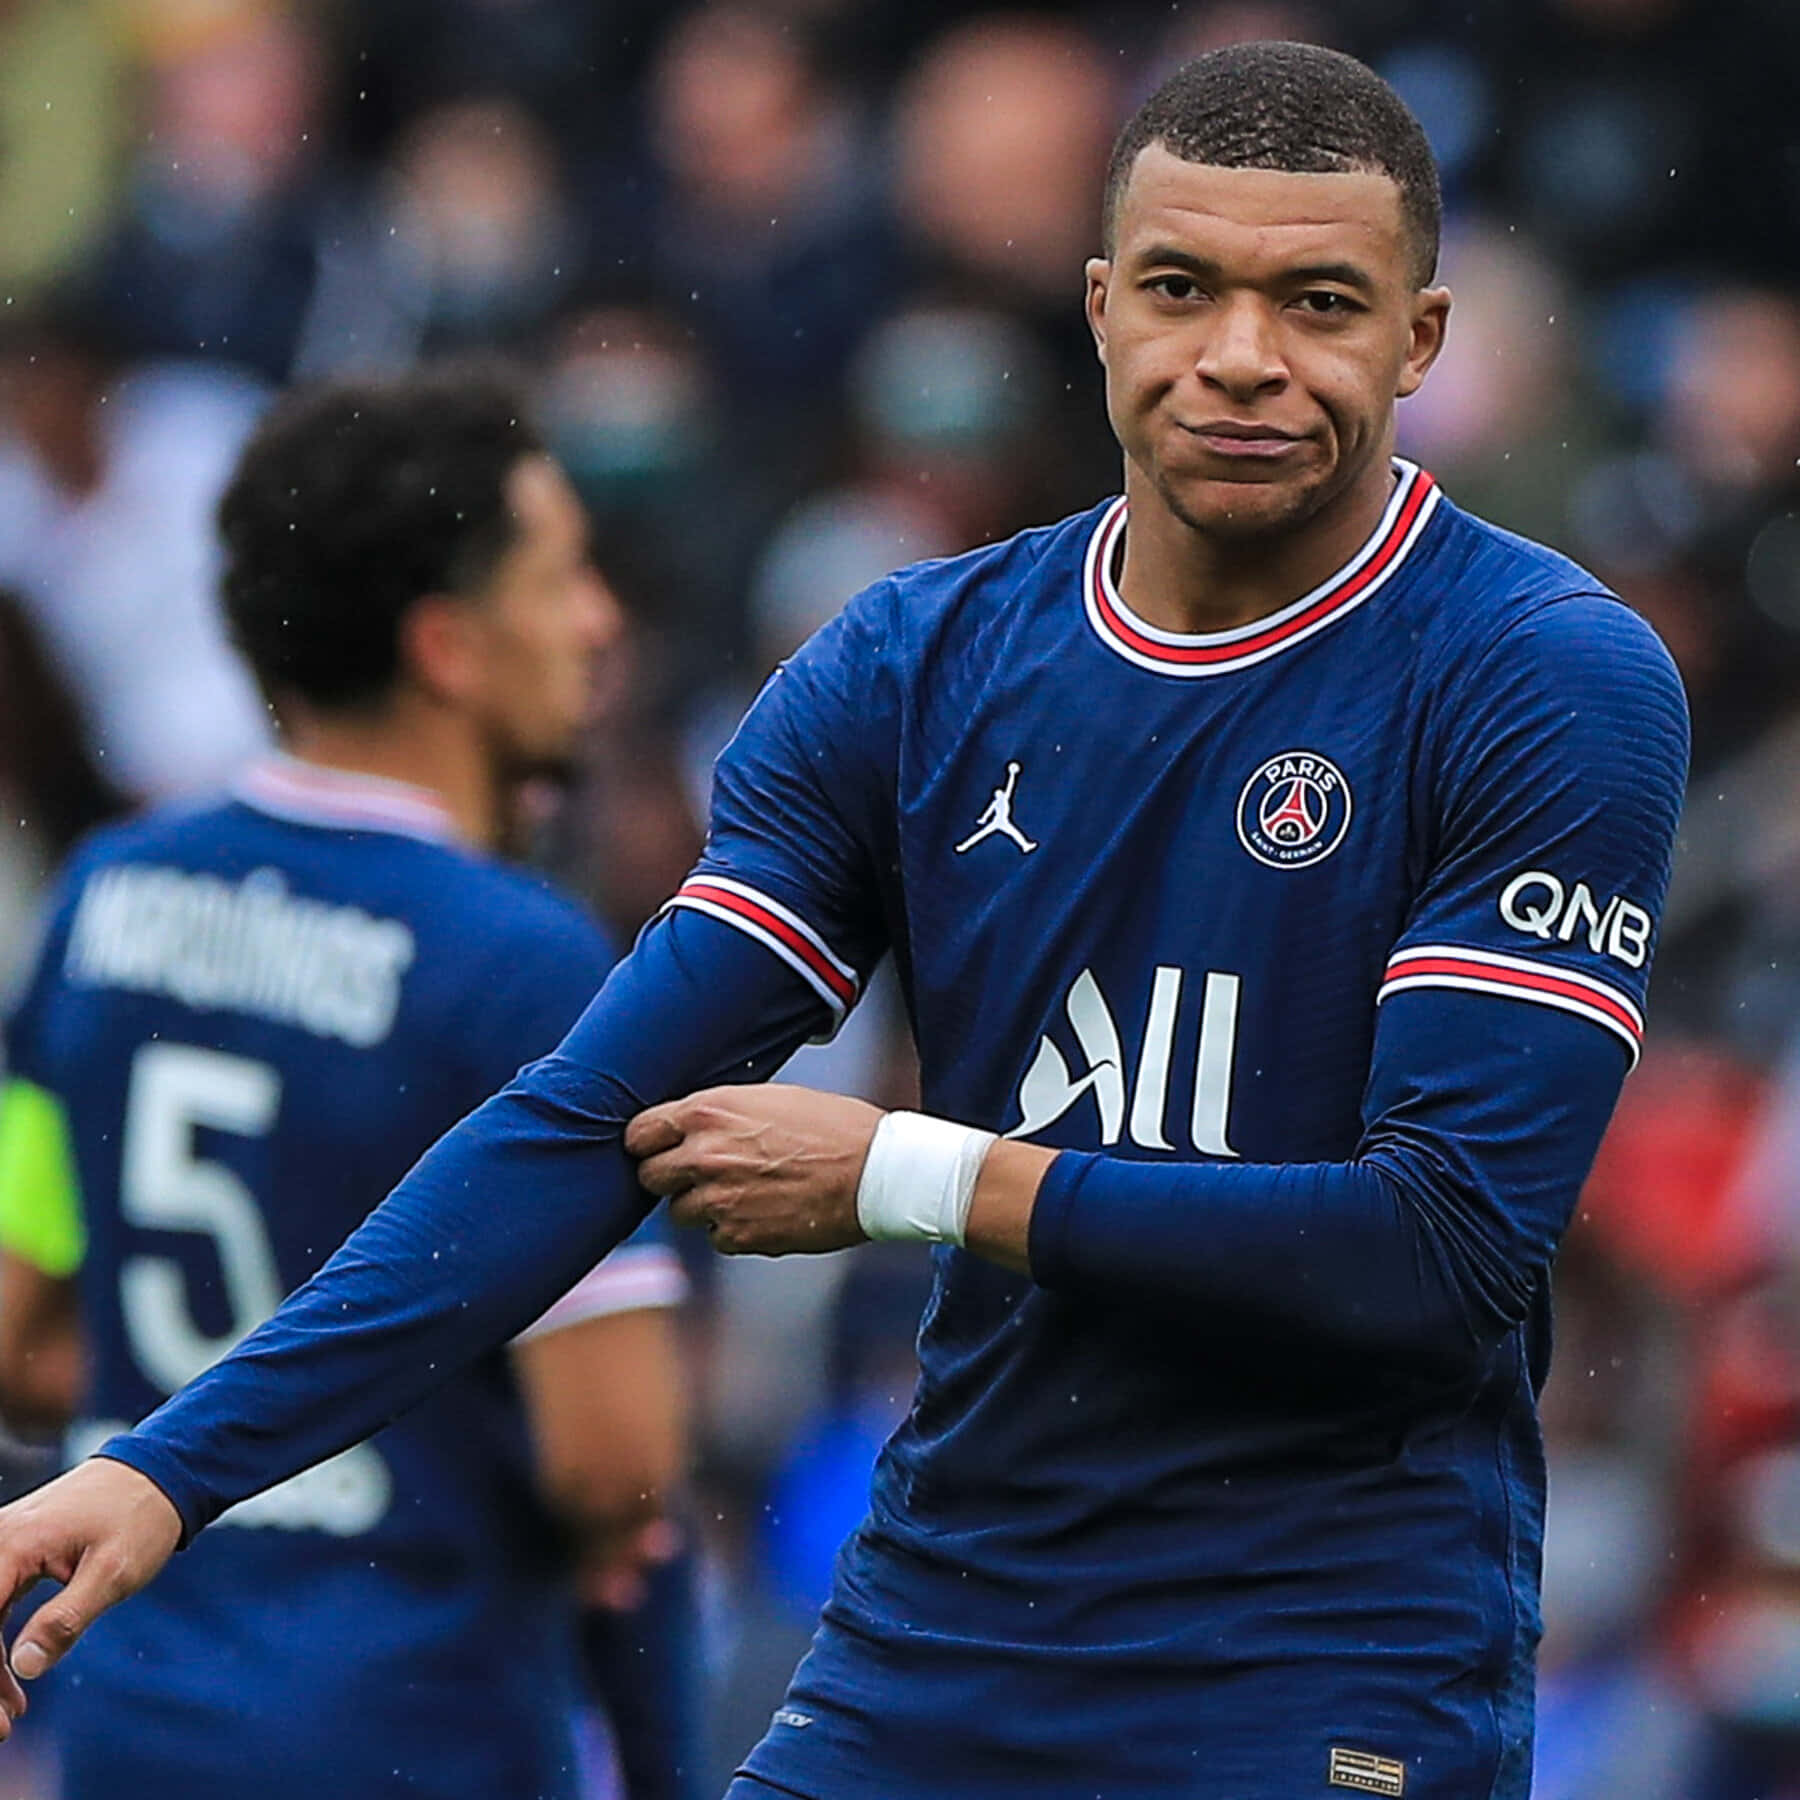 Caption: Kylian Mbappe In Action